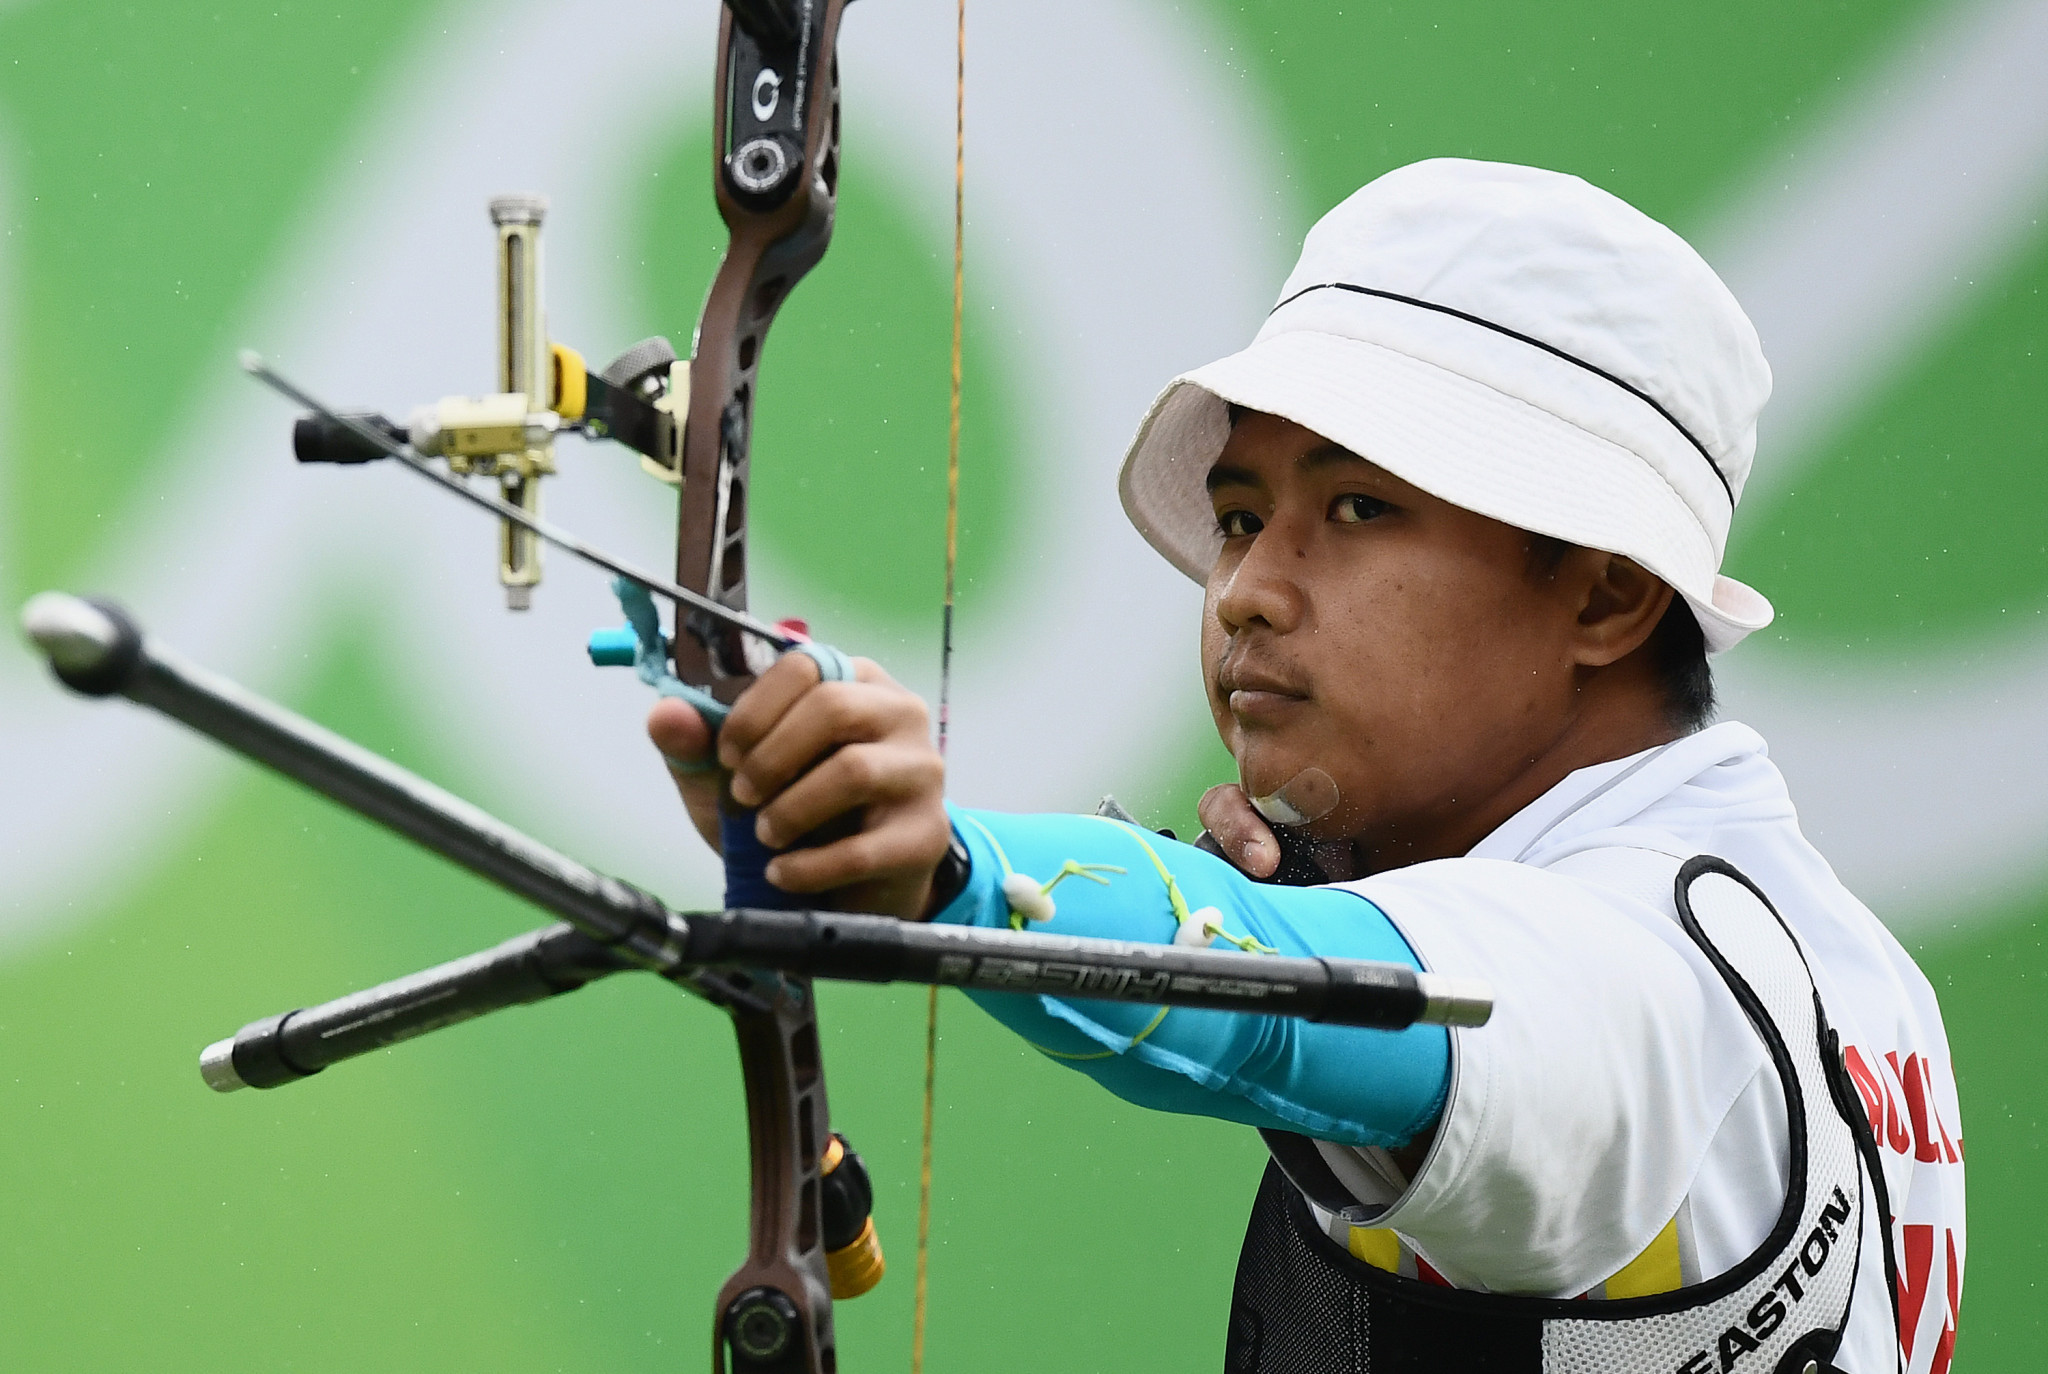 Riau Ega Agatha led Indonesia to the men's recurve final in Jakarta ©Getty Images